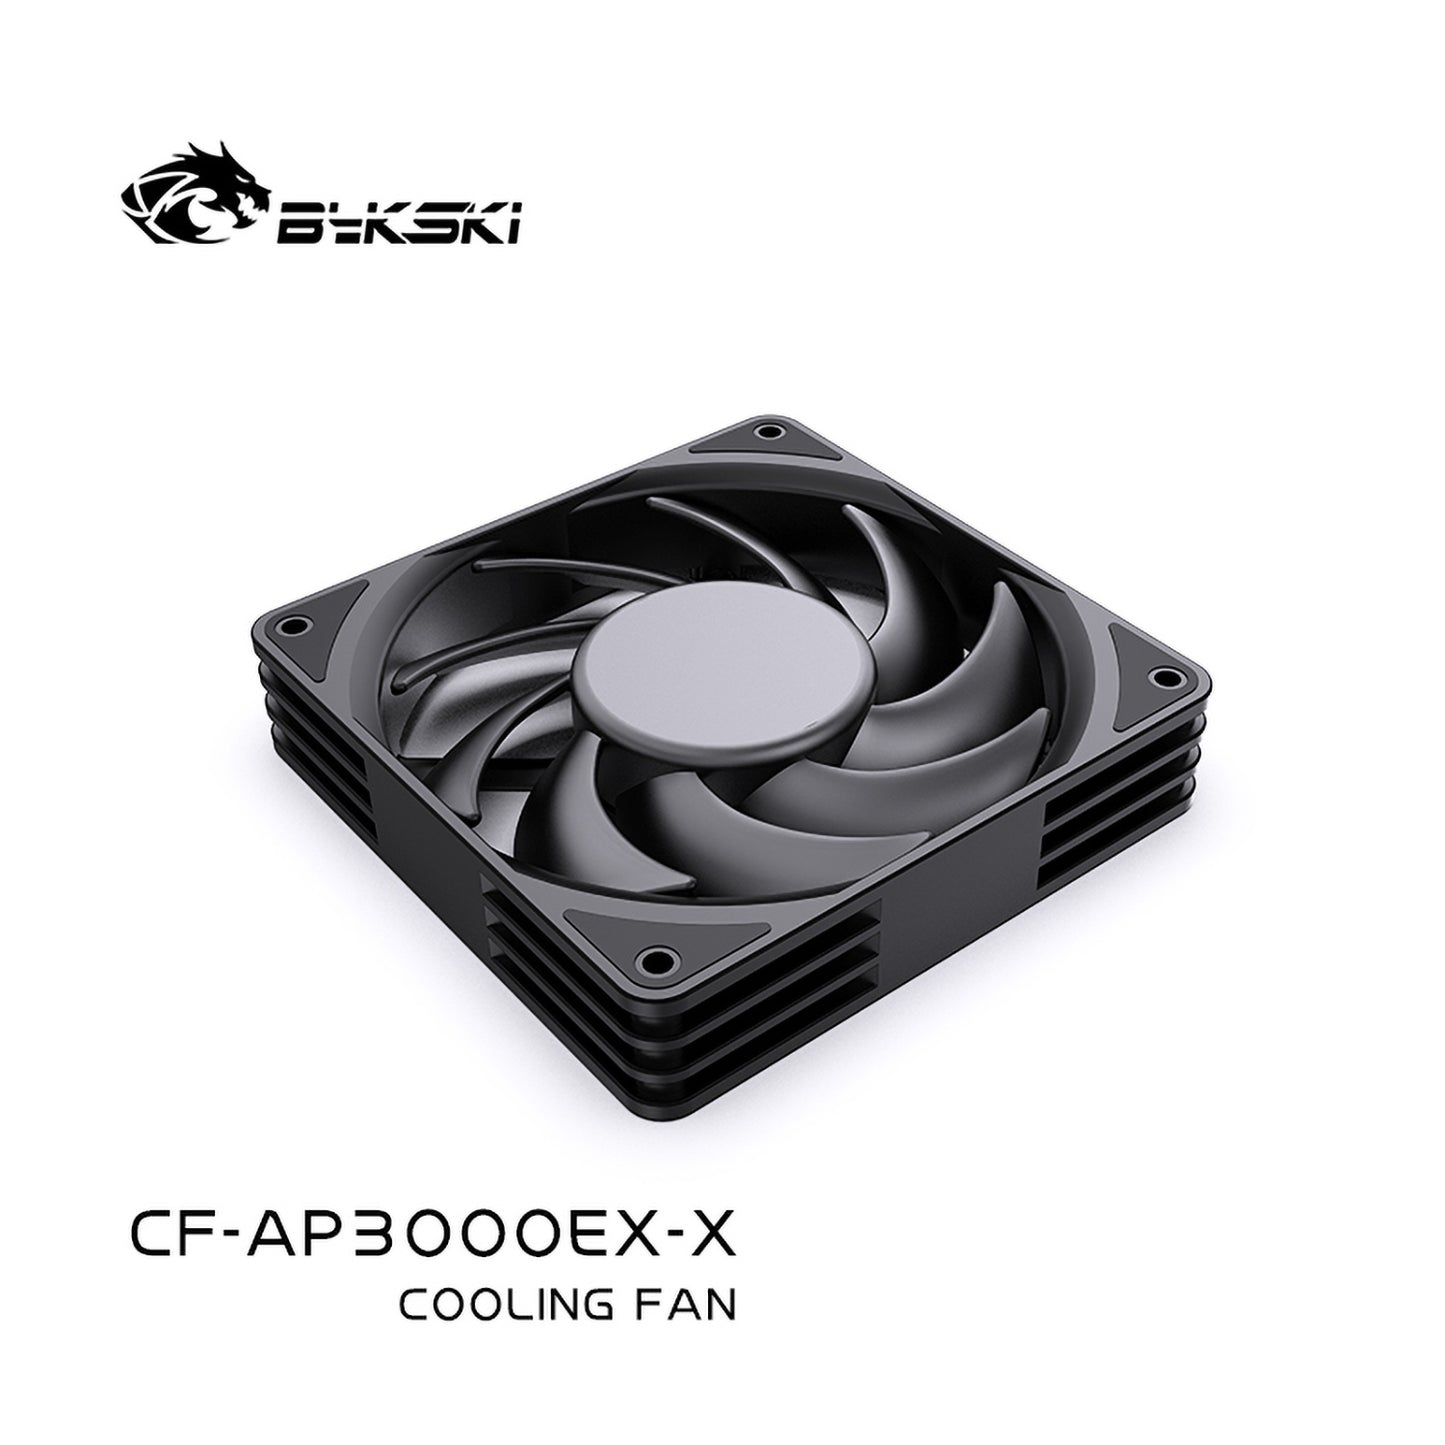 Bykski High Air Volume PWM Cooling Fan, 3000 RPM Double Ball Bearing, Water Cooling Case/Radiator Supercharged 120mm Cooler, CF-AP3000EX-X